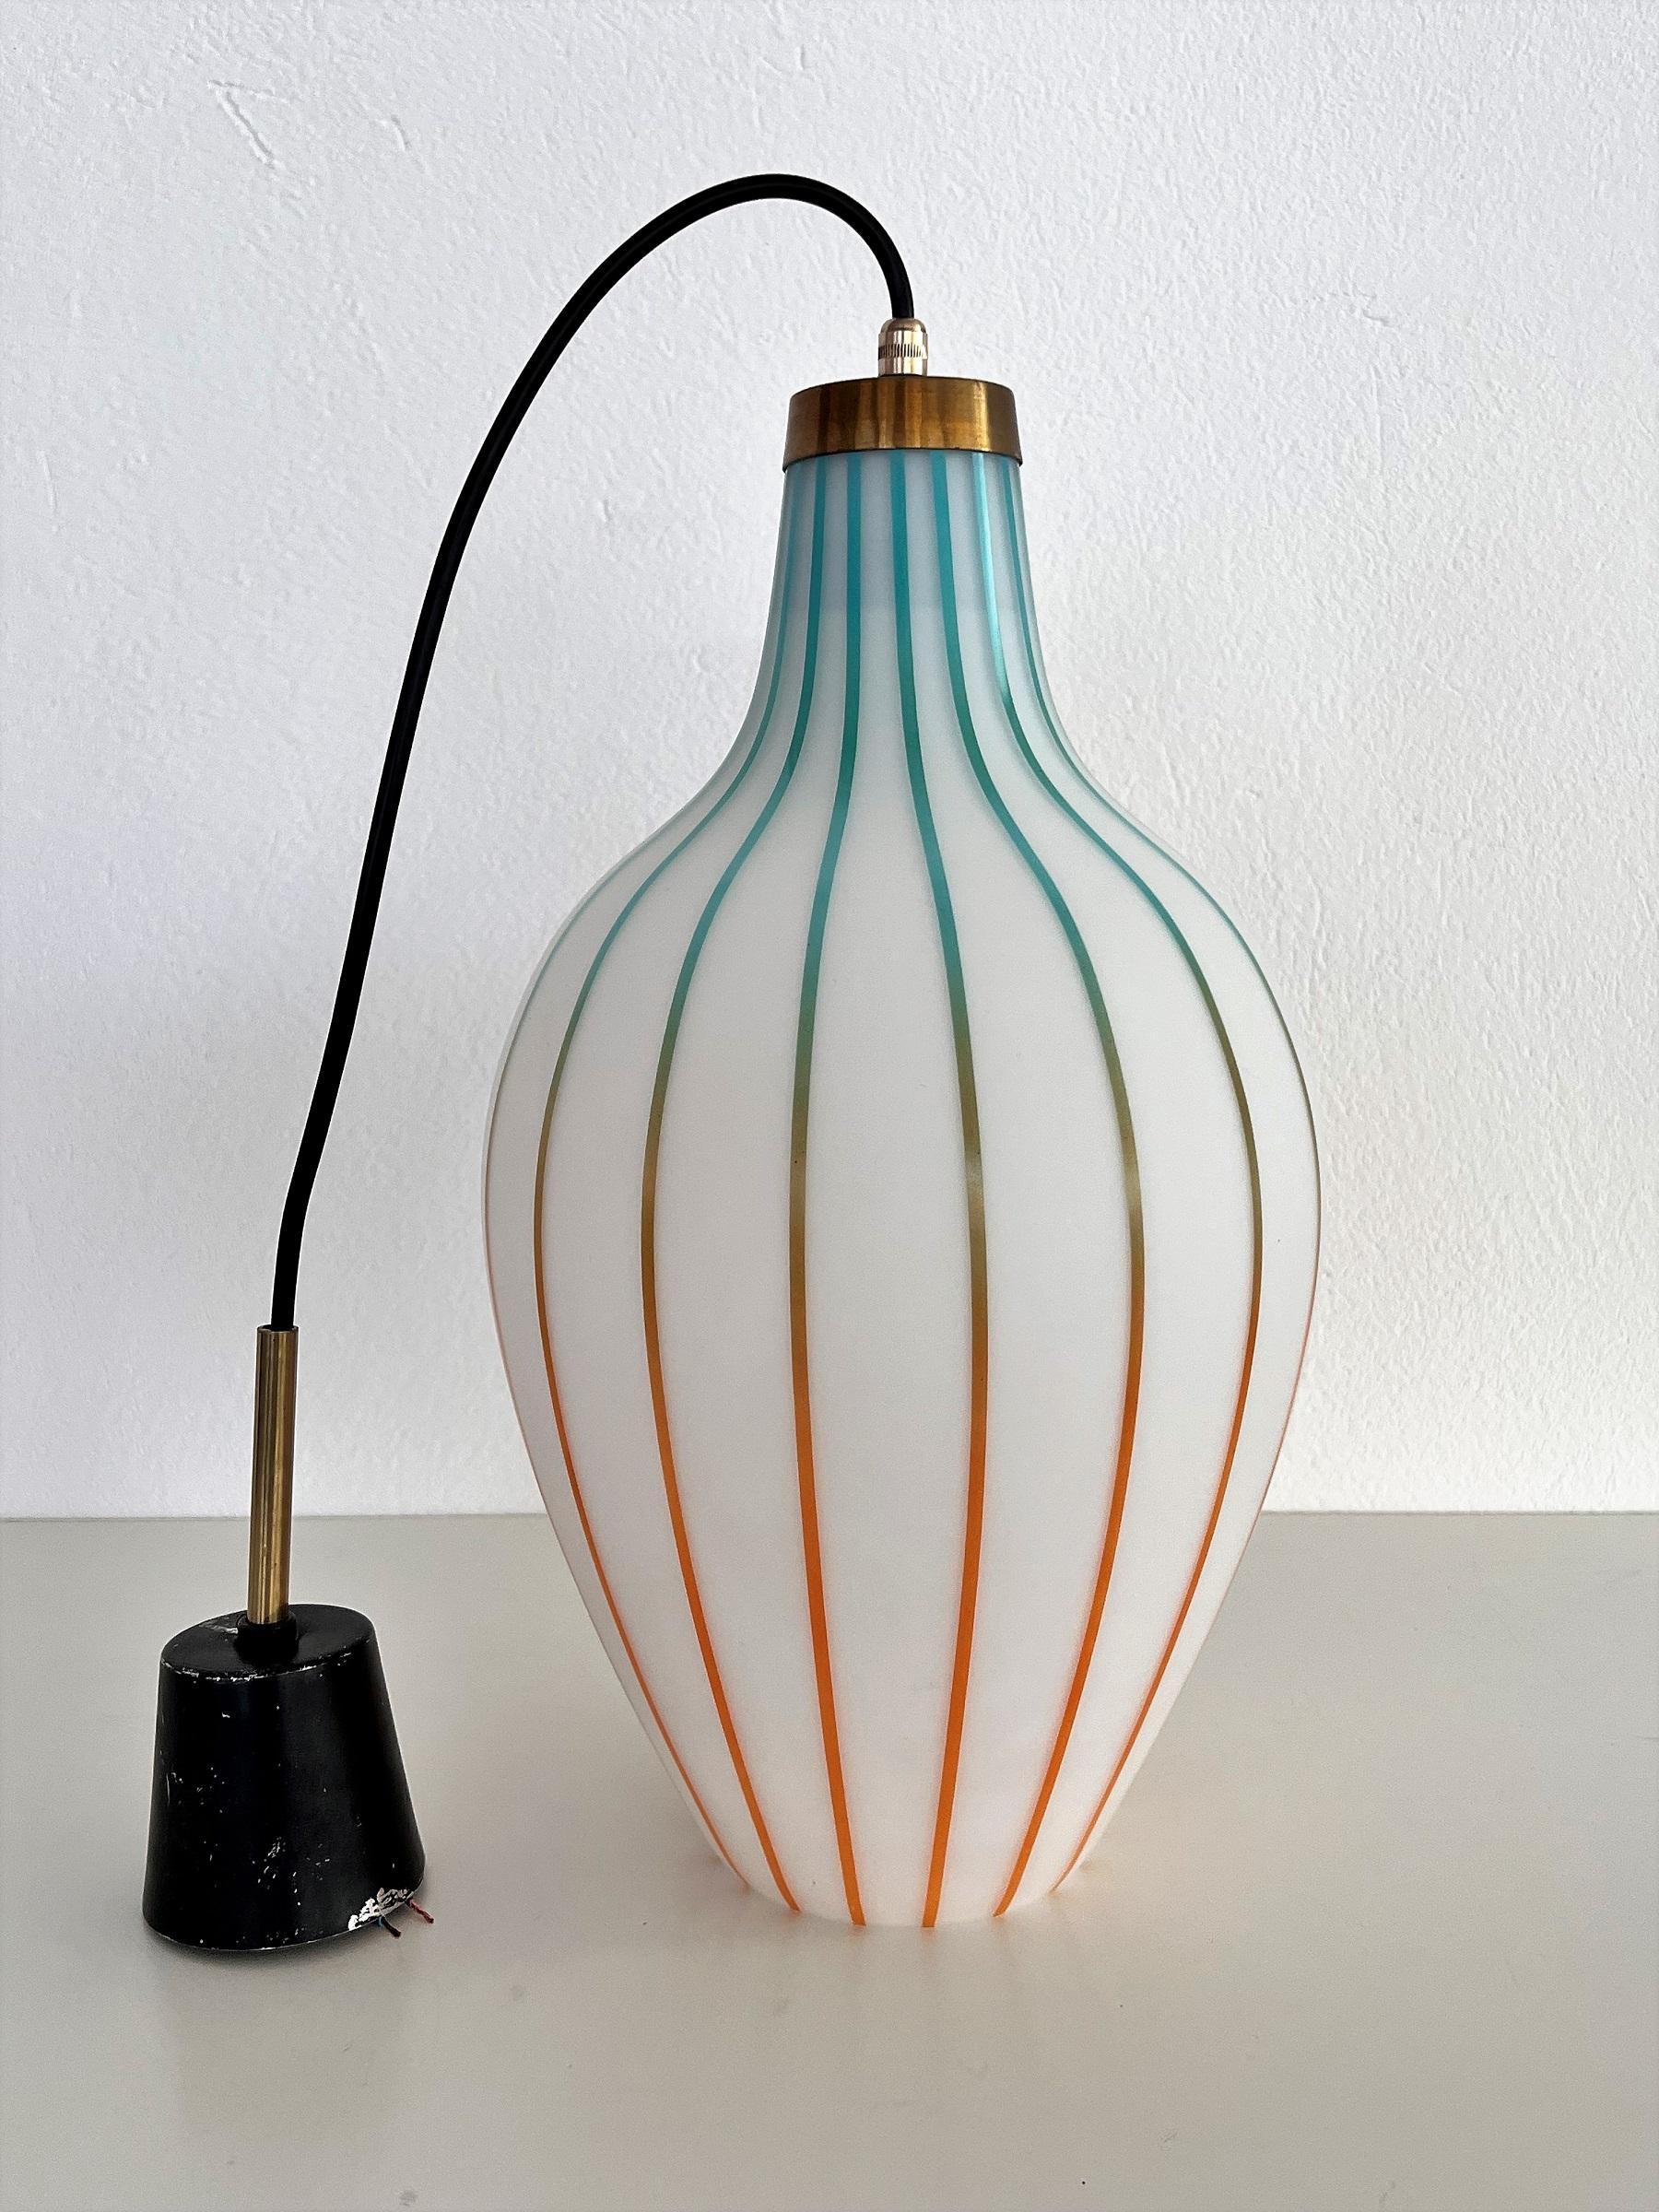 Italian MidCentury Pendant Light with Murano Glass in Massimo Vignelli Style 60s For Sale 3